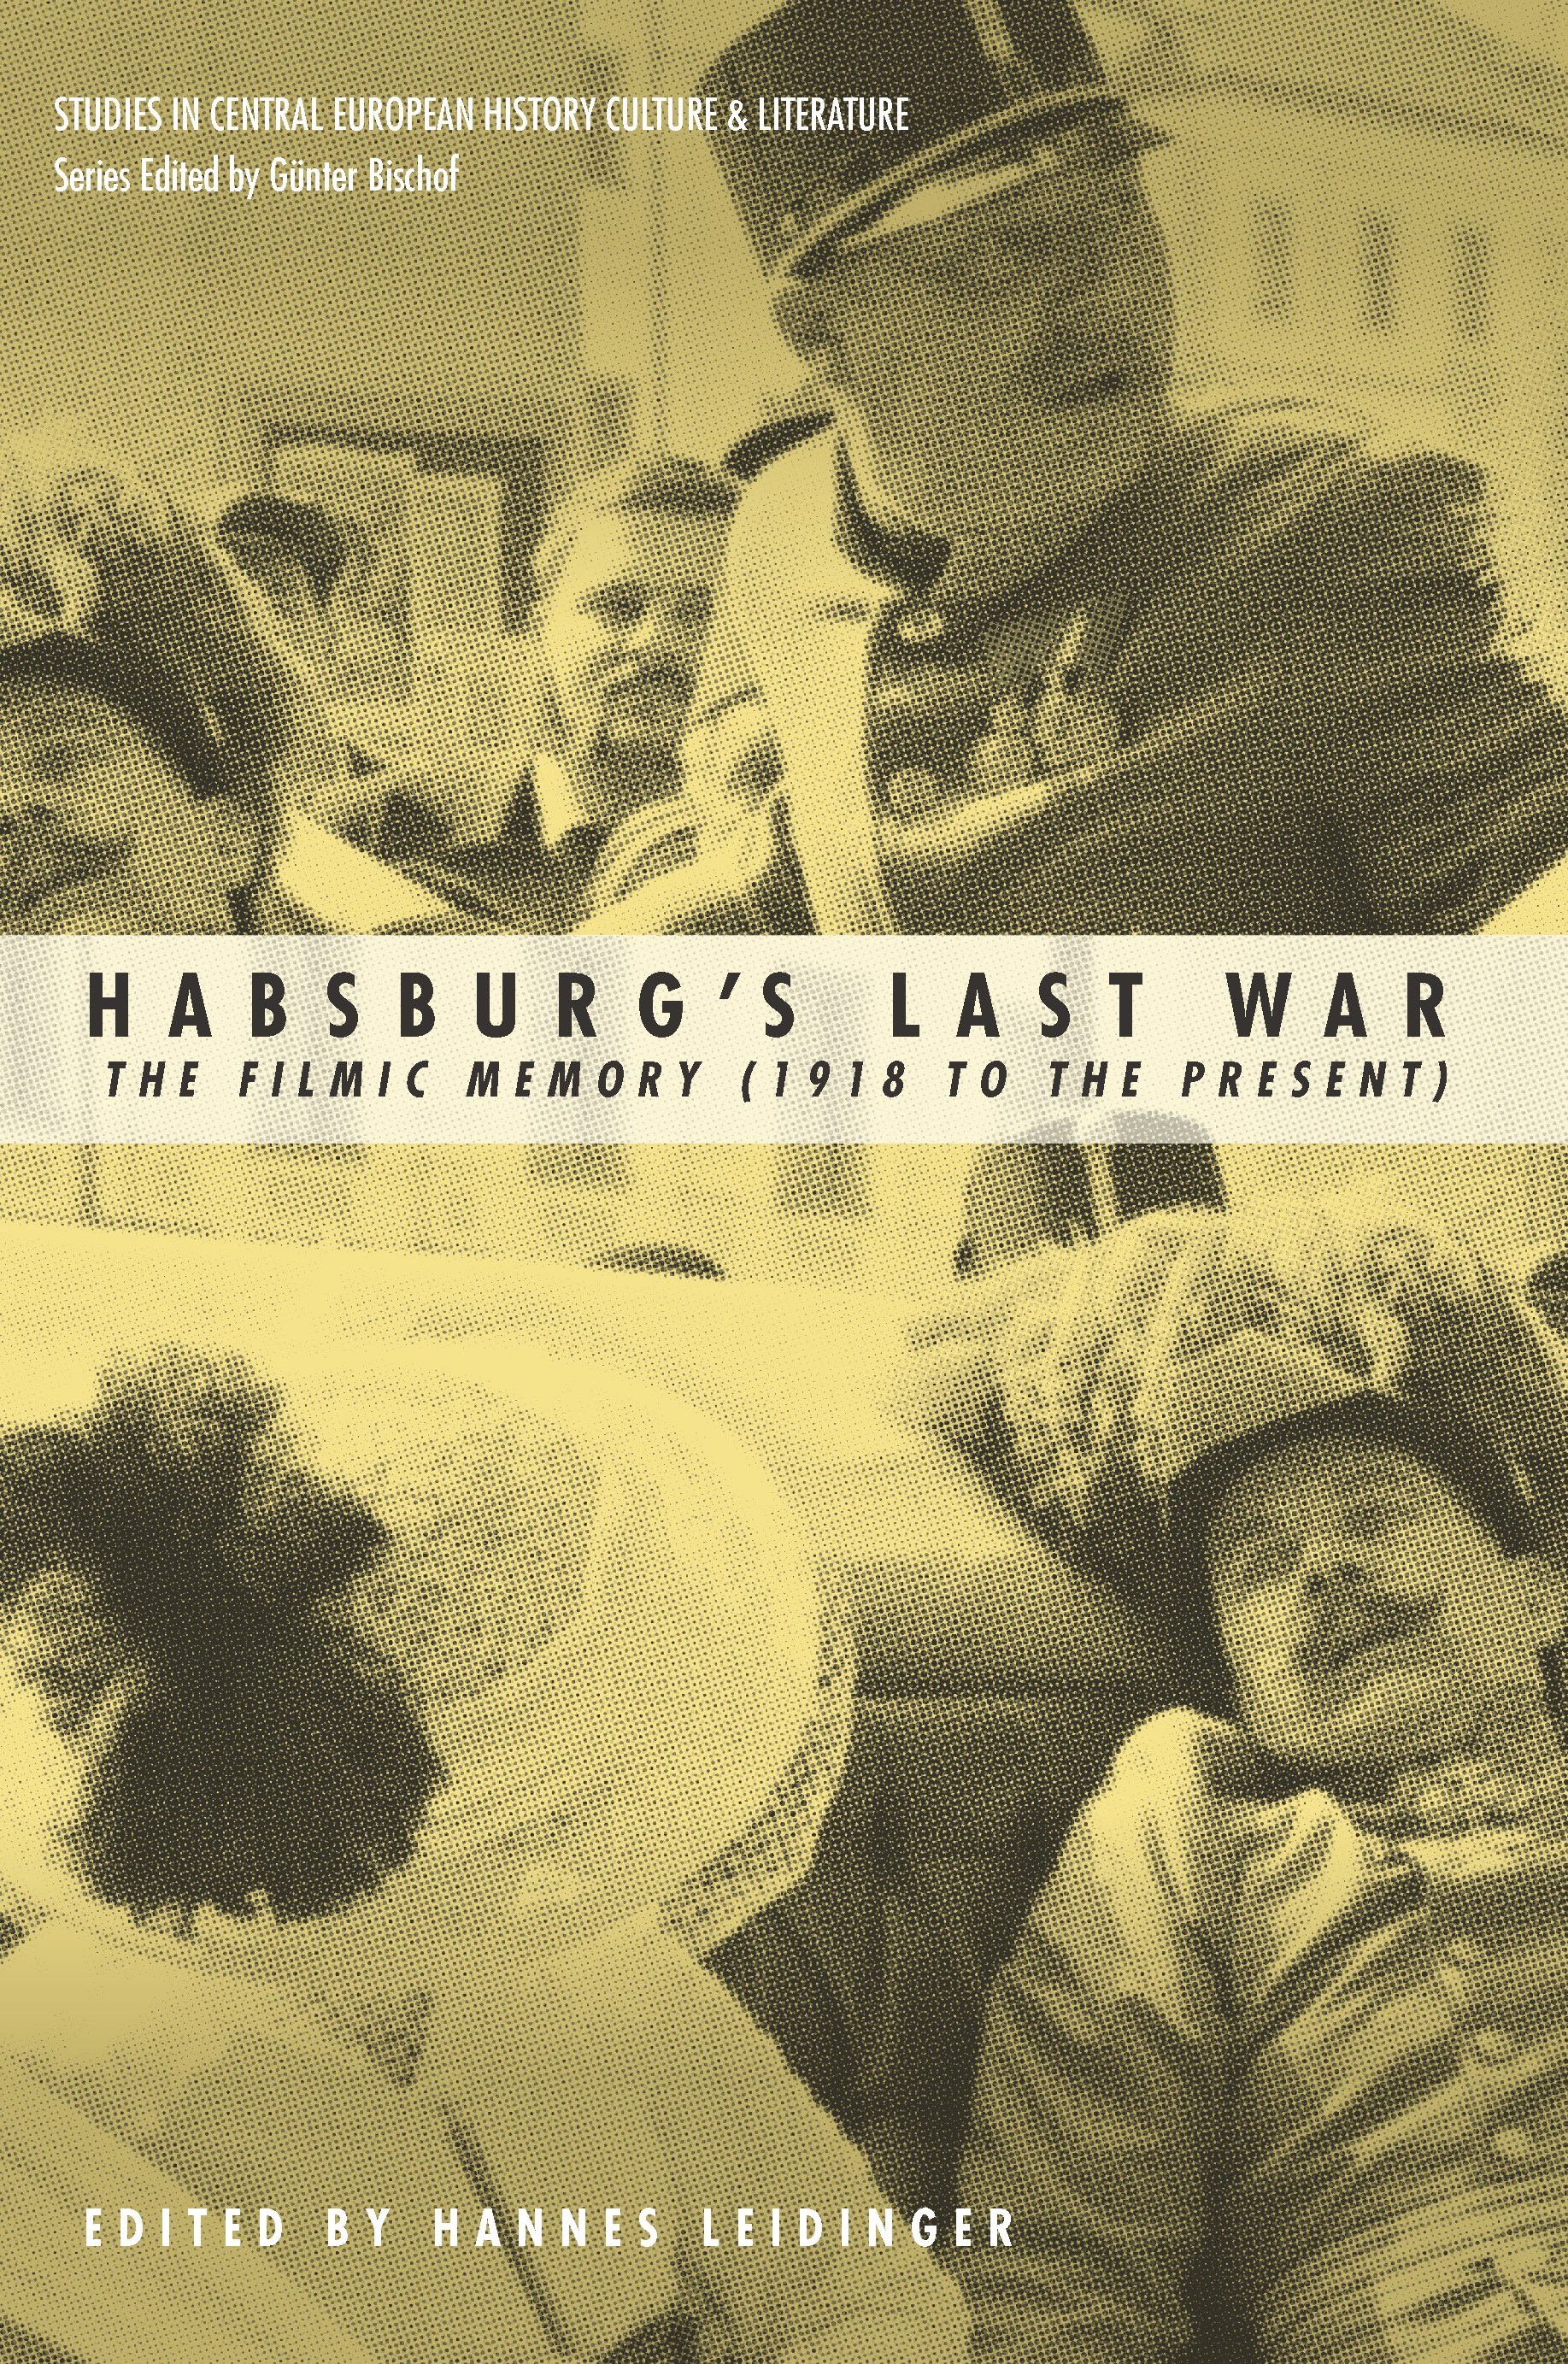 Habsburg's Last War: The Filmic Memory (1918 to the Present)